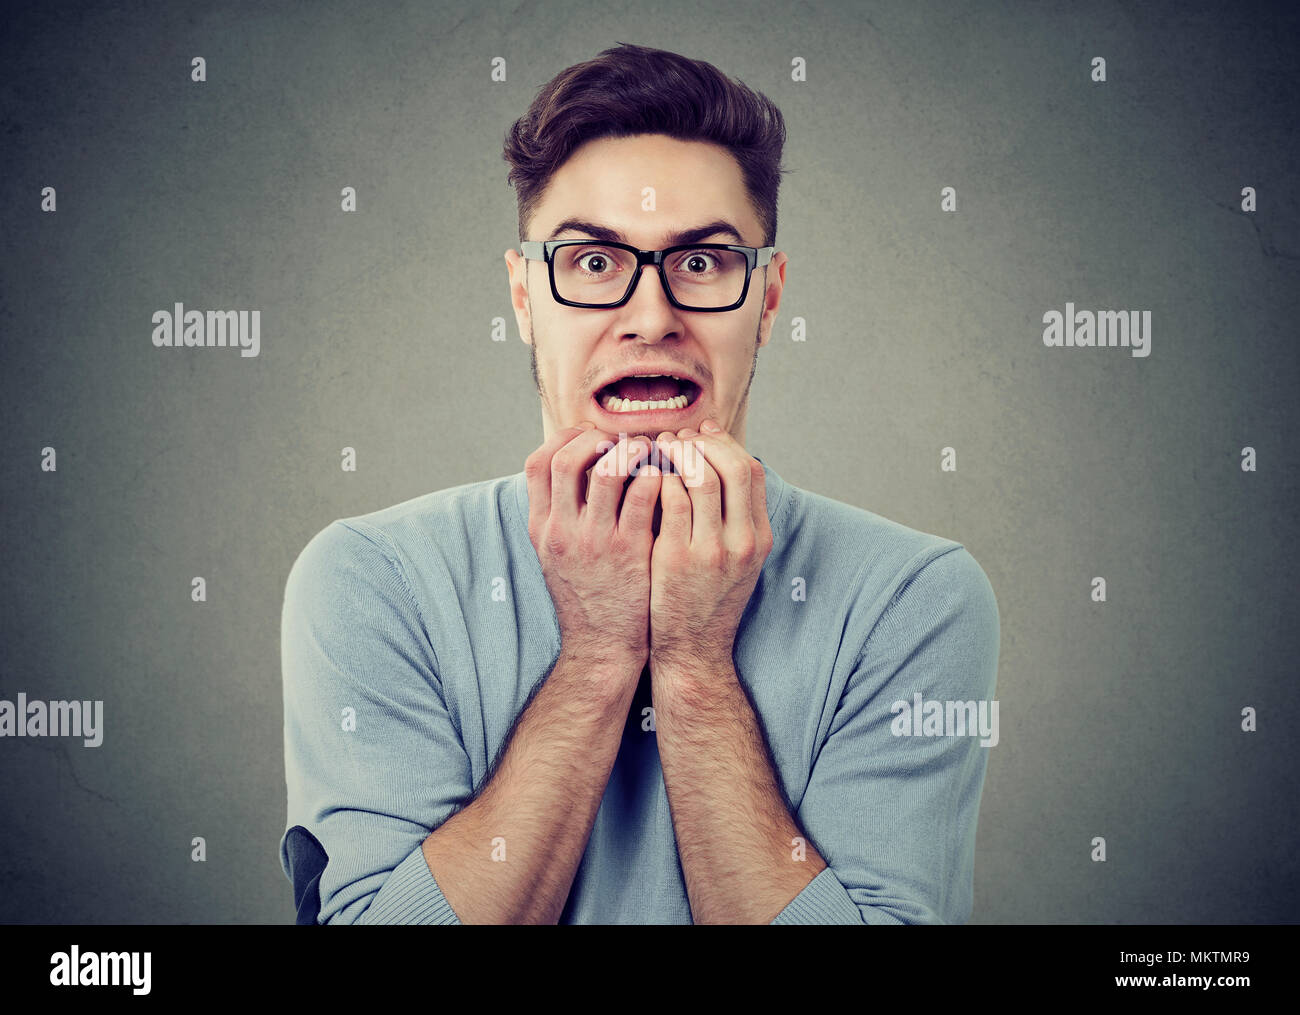 Young man in glasses having panic attack and looking with fear at camera on gray background. Stock Photo